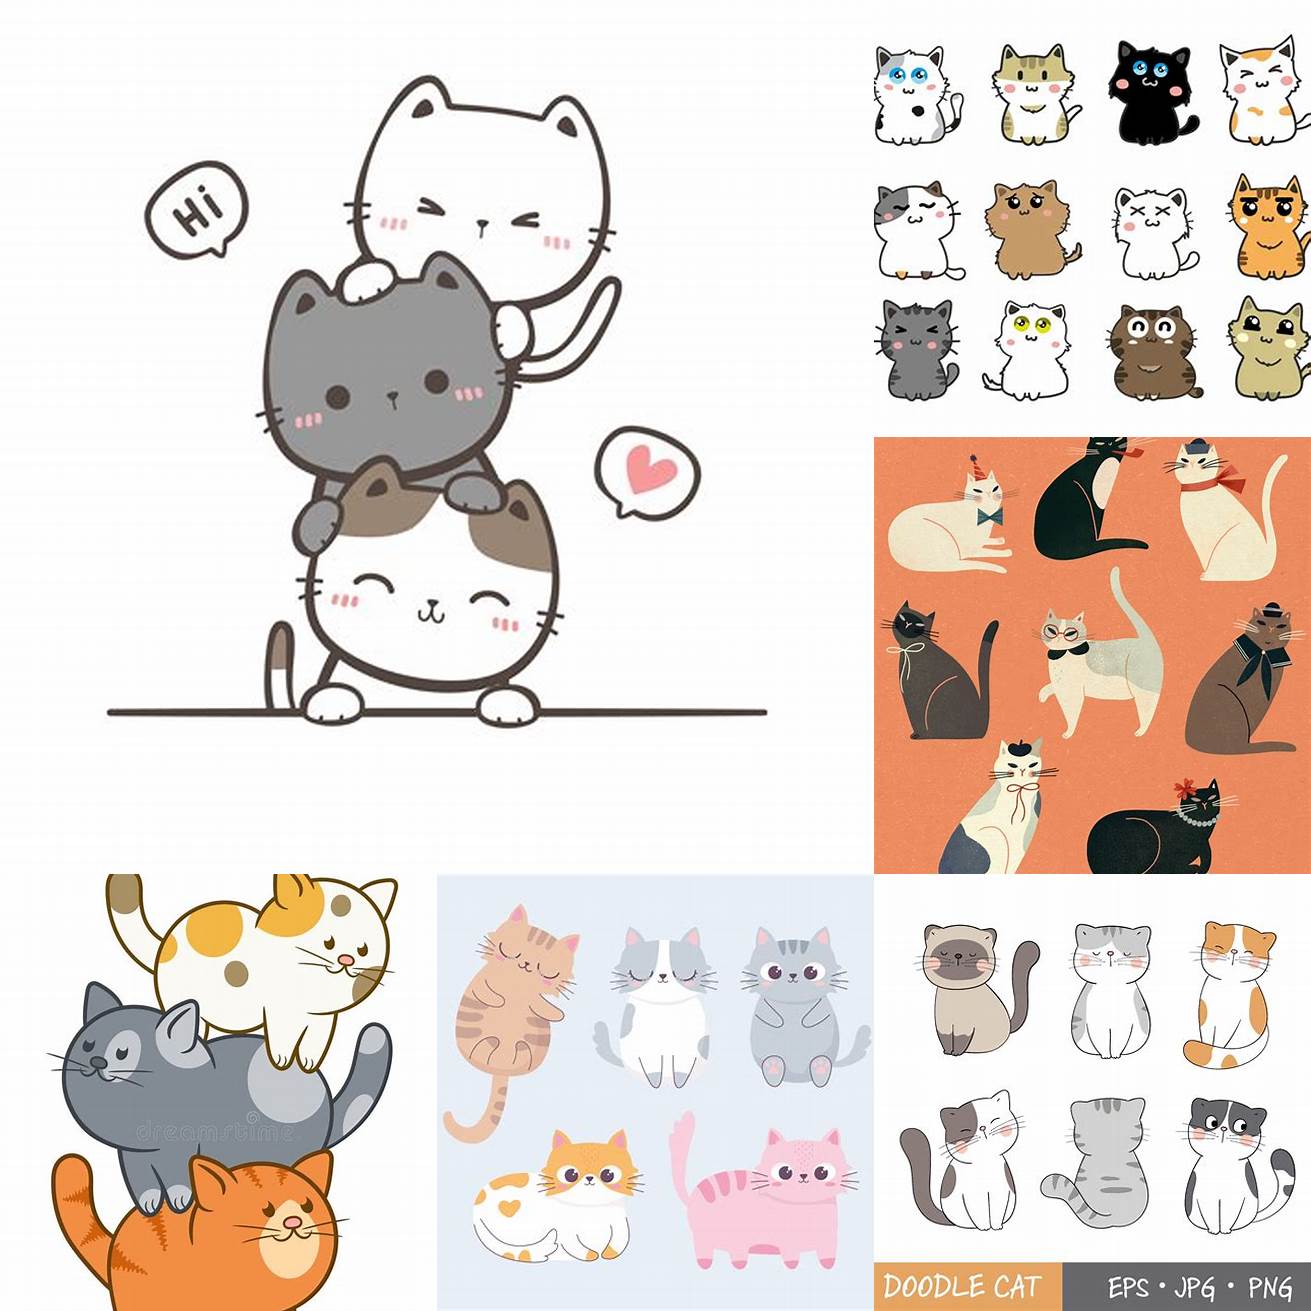 Cute Illustrations of 3 Cats